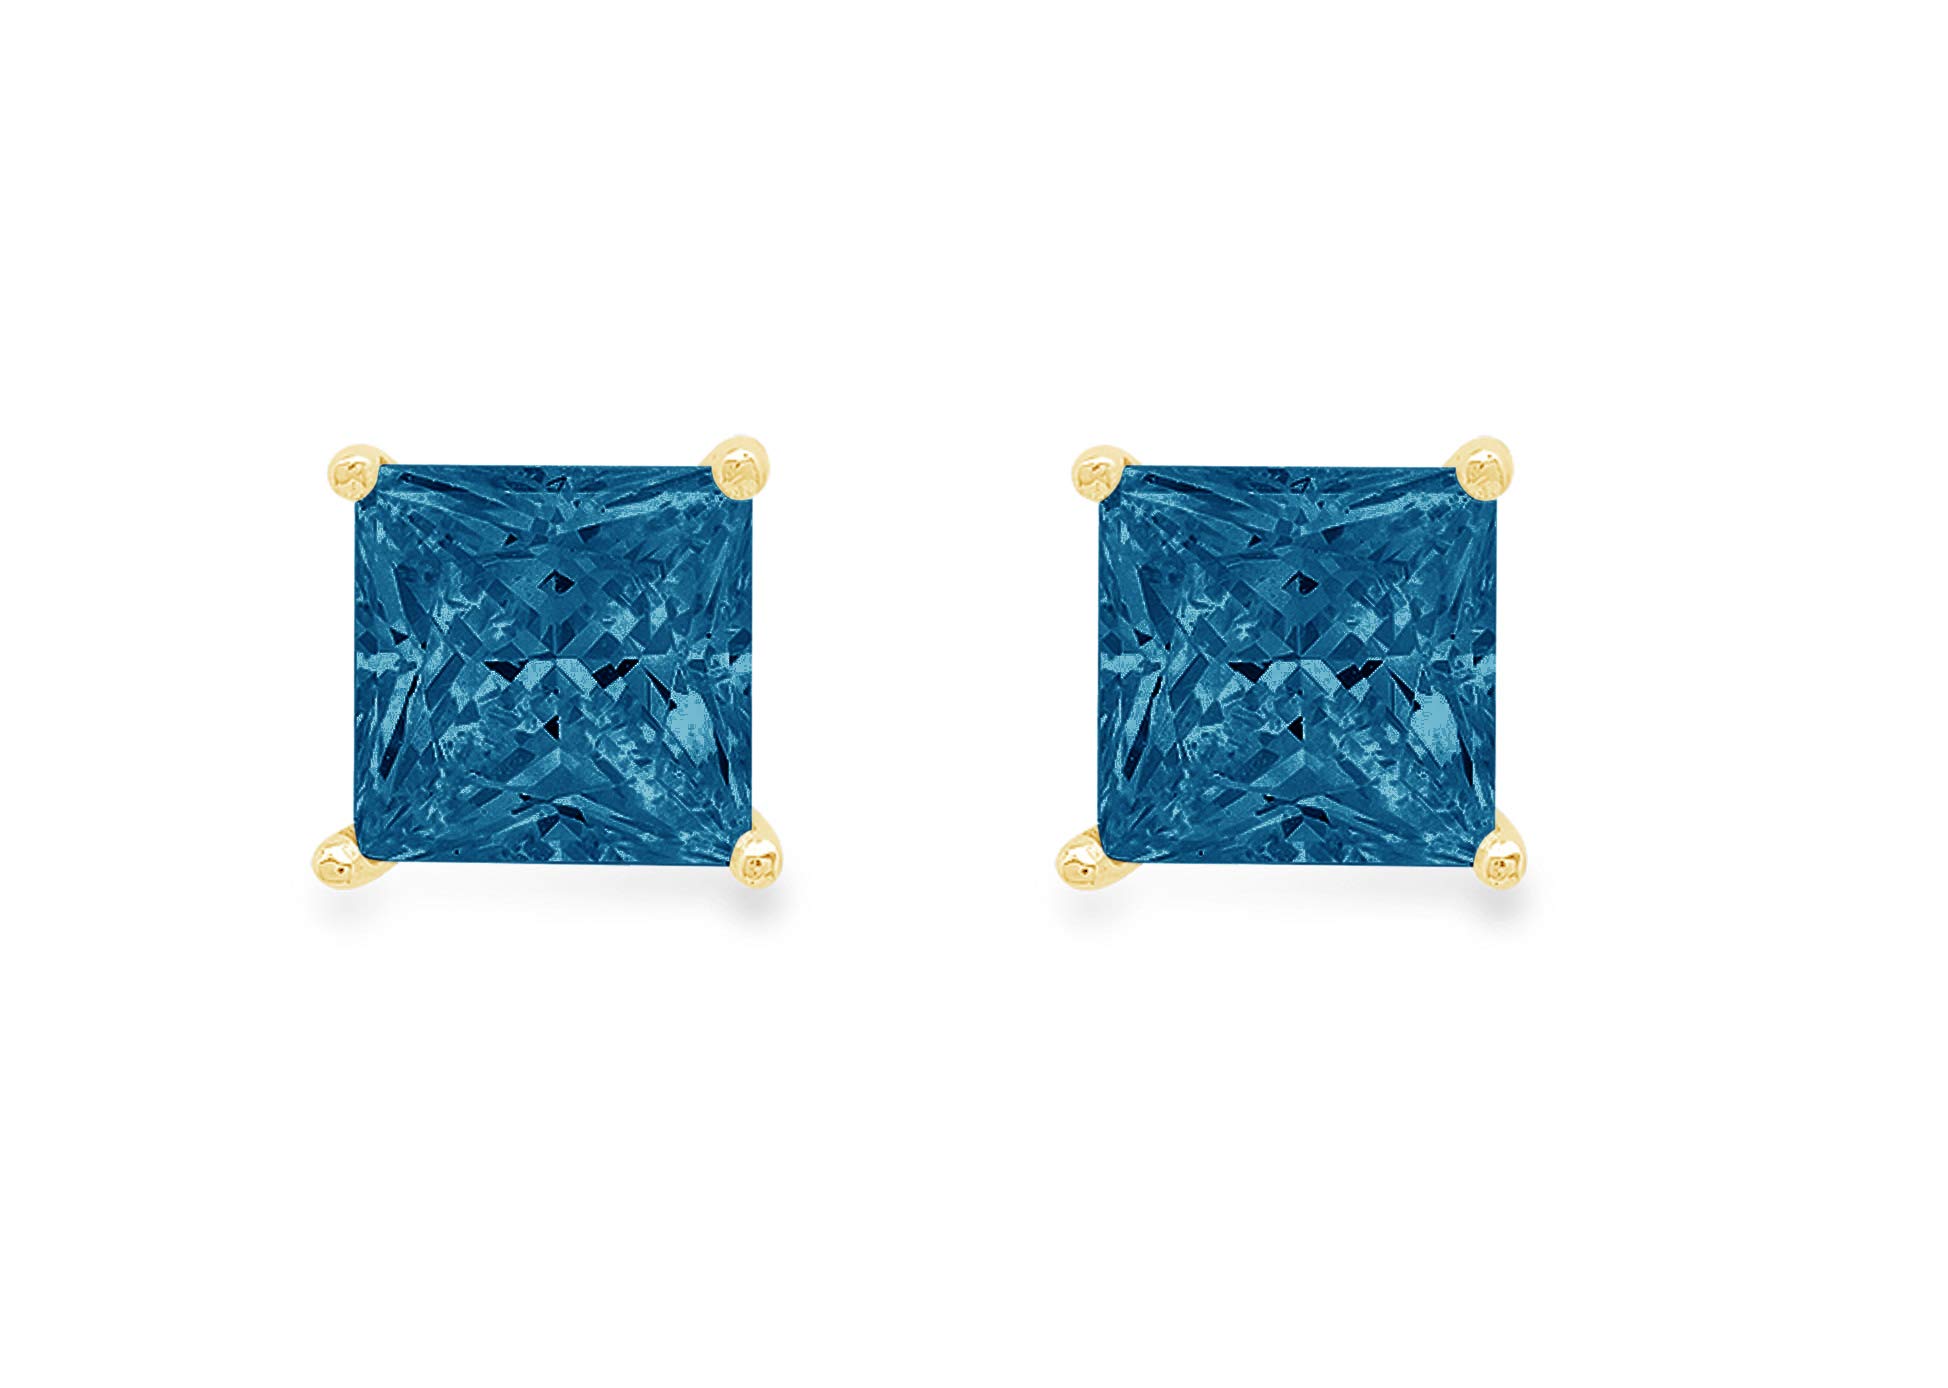 1.1ct Brilliant Princess Cut Solitaire unique Fine Earrings Natural Royal Blue Topaz Gemstone Anniversary Birthstone Stud Earrings Solid 14k Yellow Gold Butterfly Push Back